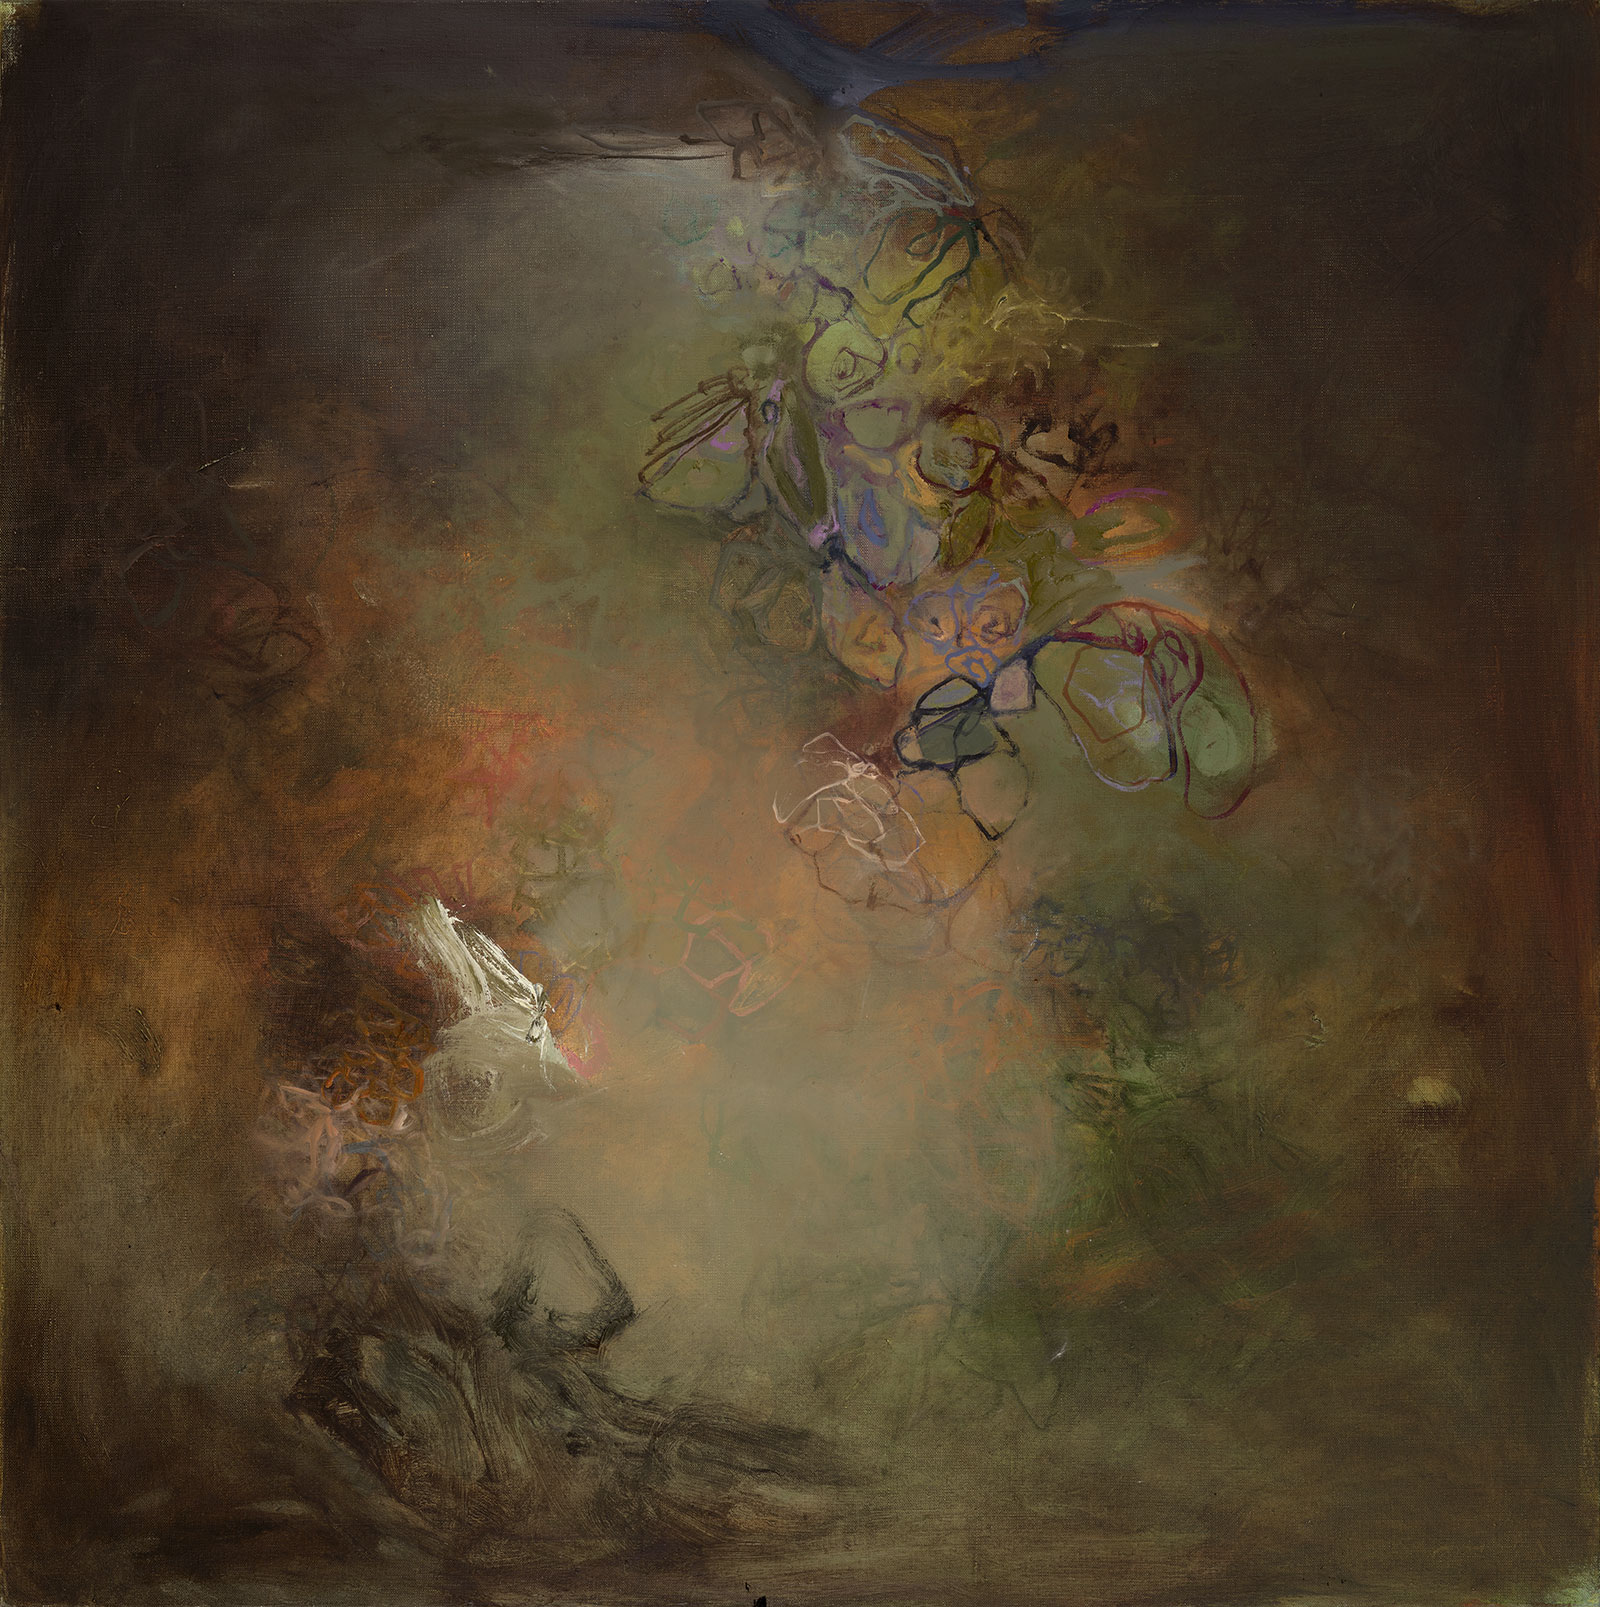 “In a Specific Moment (for Elizabeth Russell)“, 36 x 36 inches, oil on linen, 2022-2023